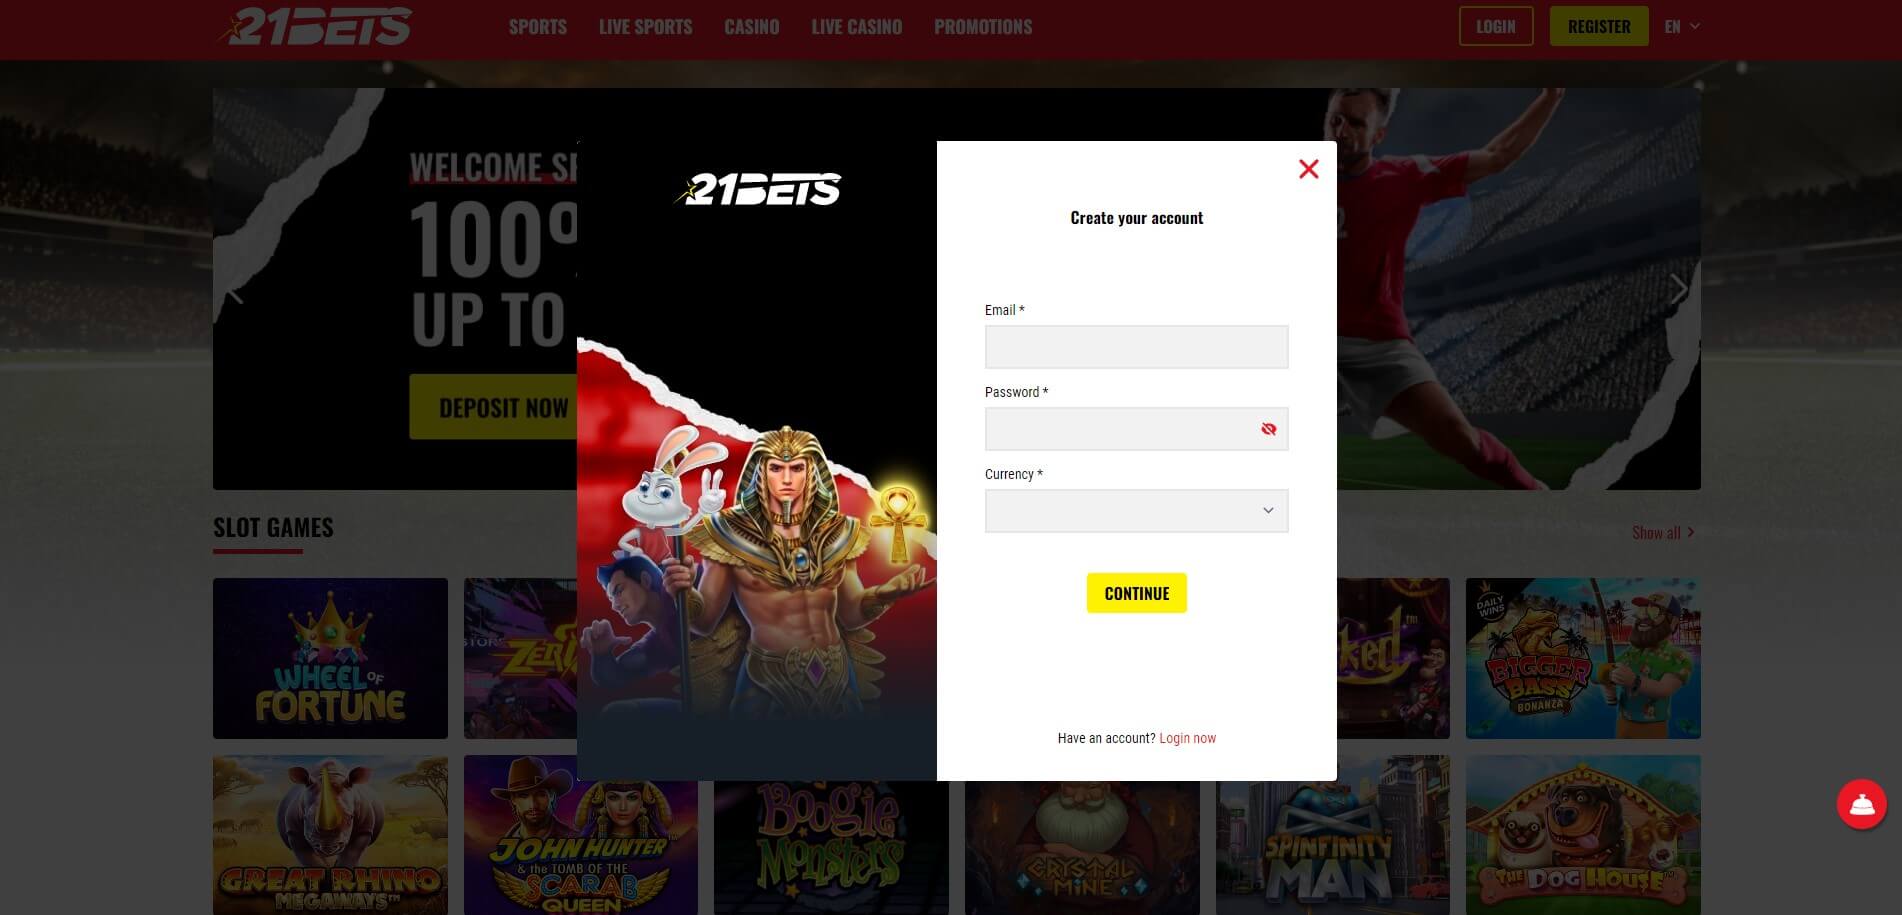 Creat your account at 21Bet Casino